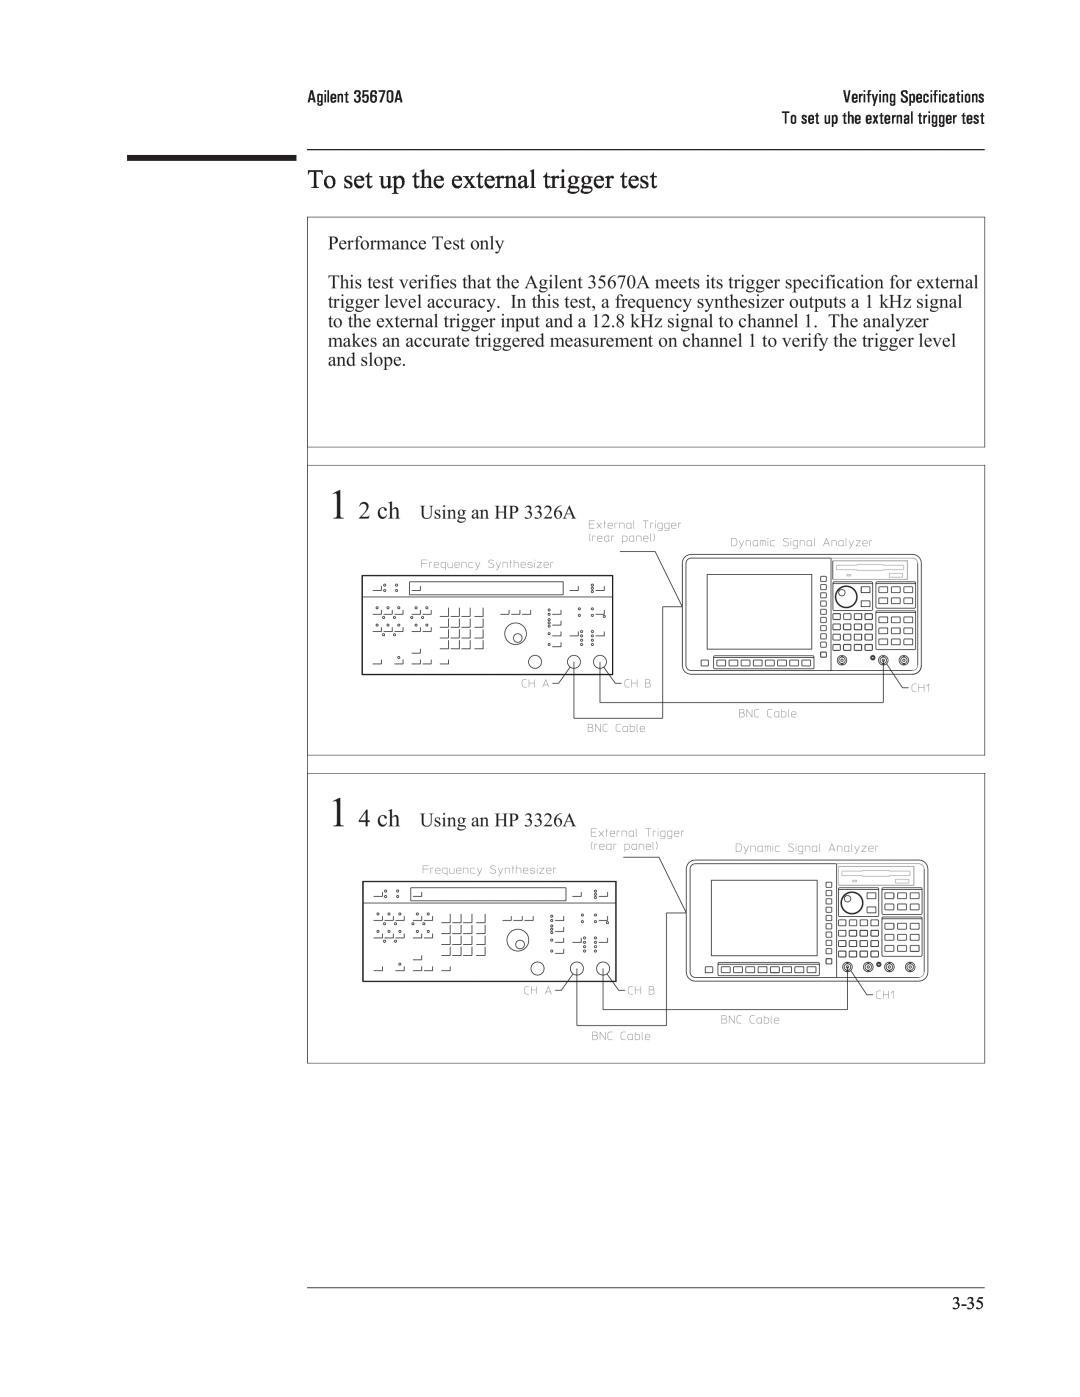 Agilent Technologies 35670-90066 manual To set up the external trigger test, 1 2 ch, 1 4 ch 